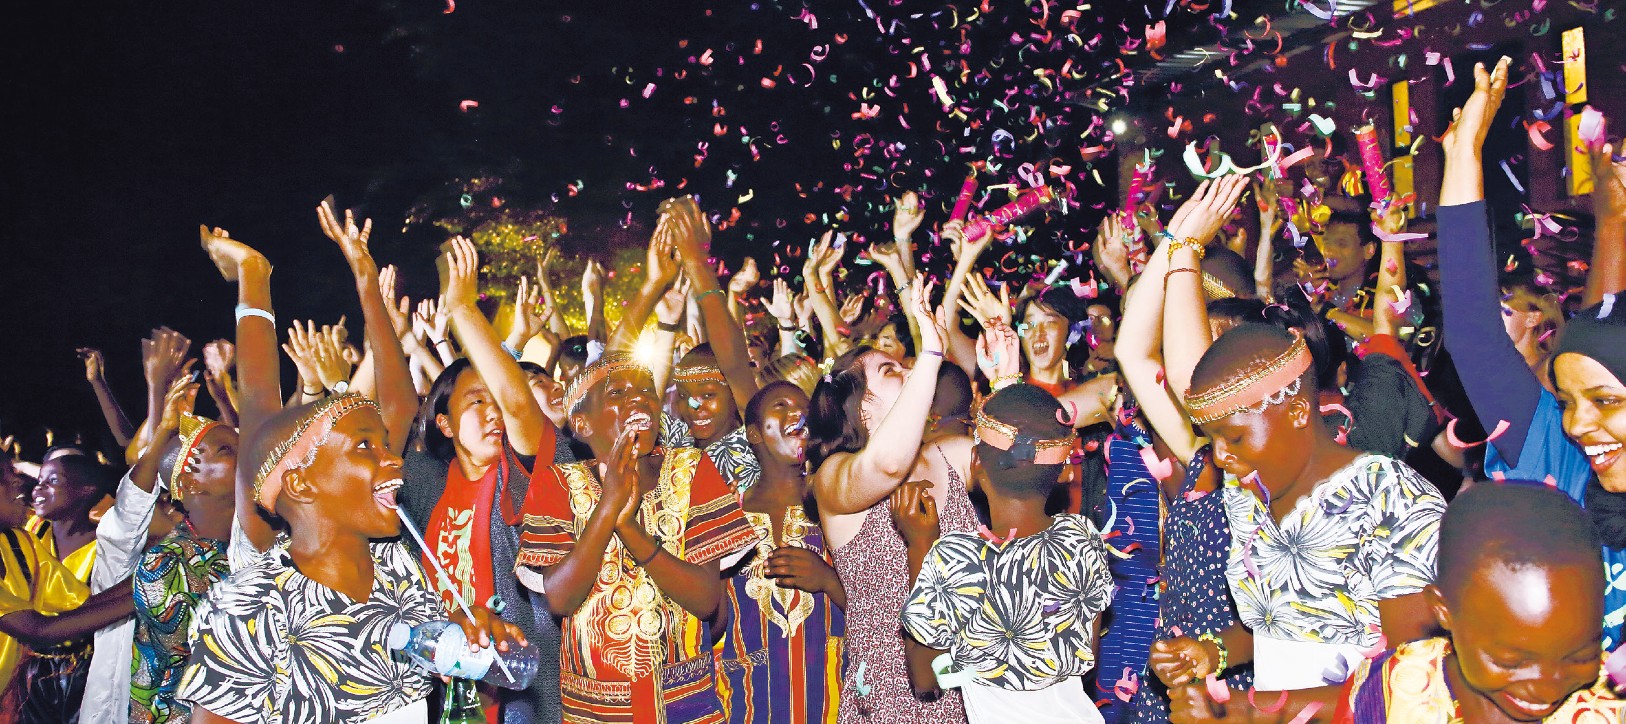 Children smiling and celebrating with confetti in the air